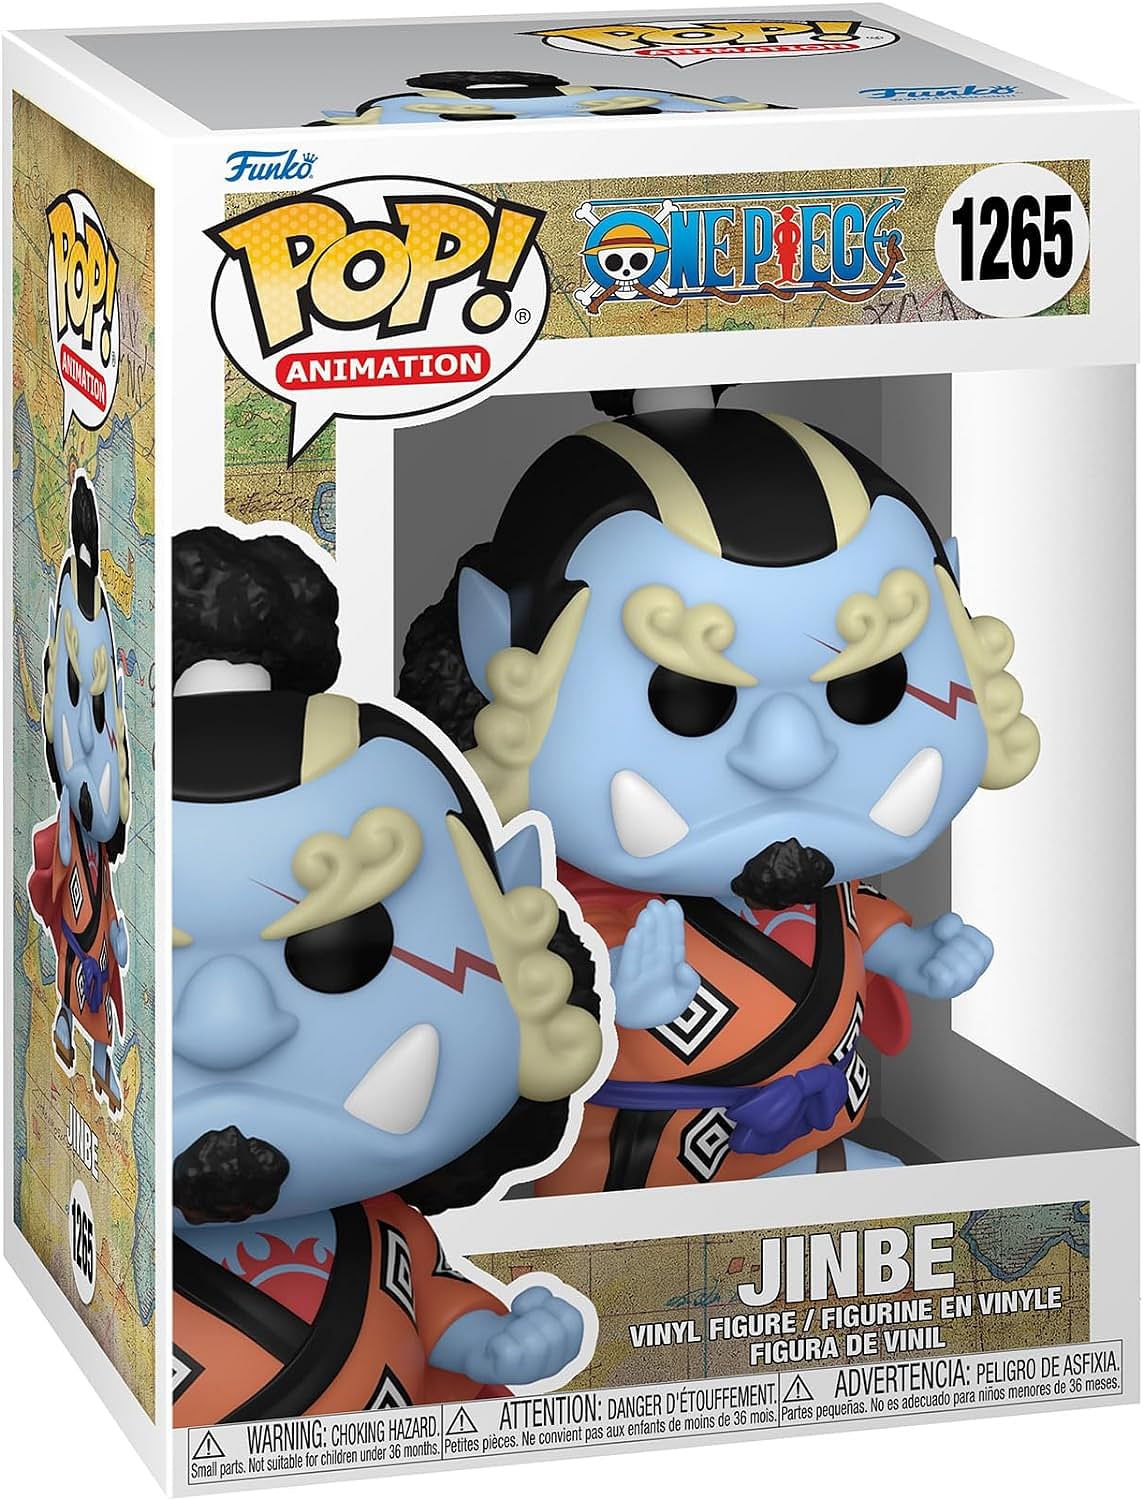 Funko Pop! Animation: One Piece - Jinbe w/chase, Collectible Action Vinyl Figure - 61367